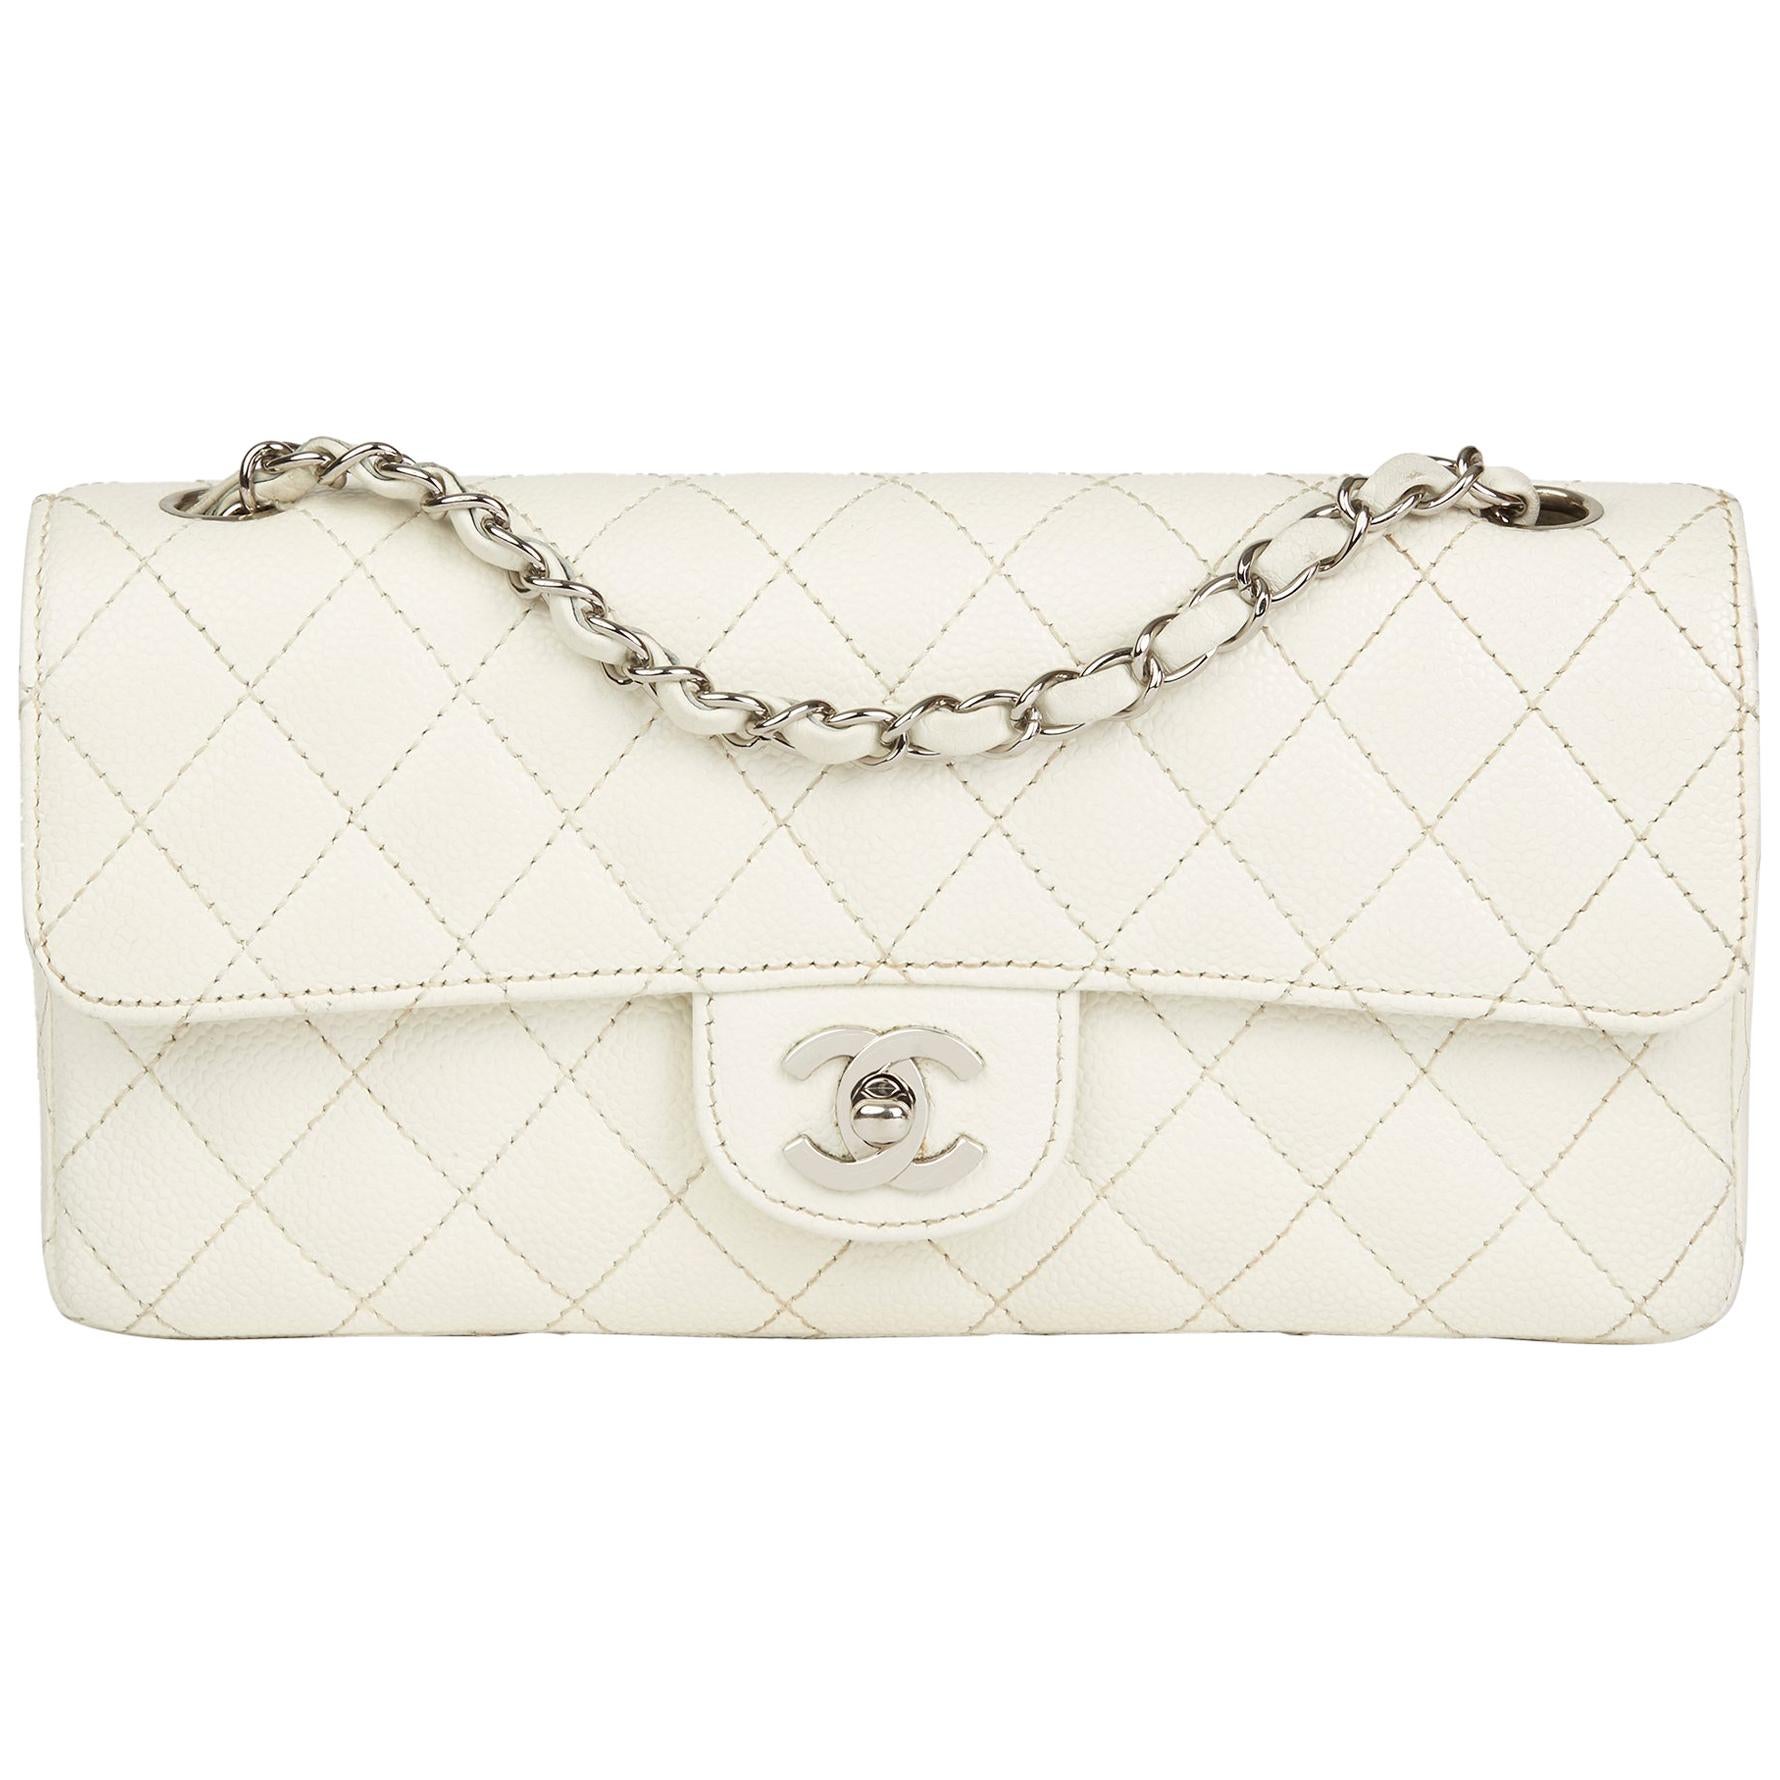 2005 Chanel White Quilted Caviar Leather East West Classic Single Flap ...